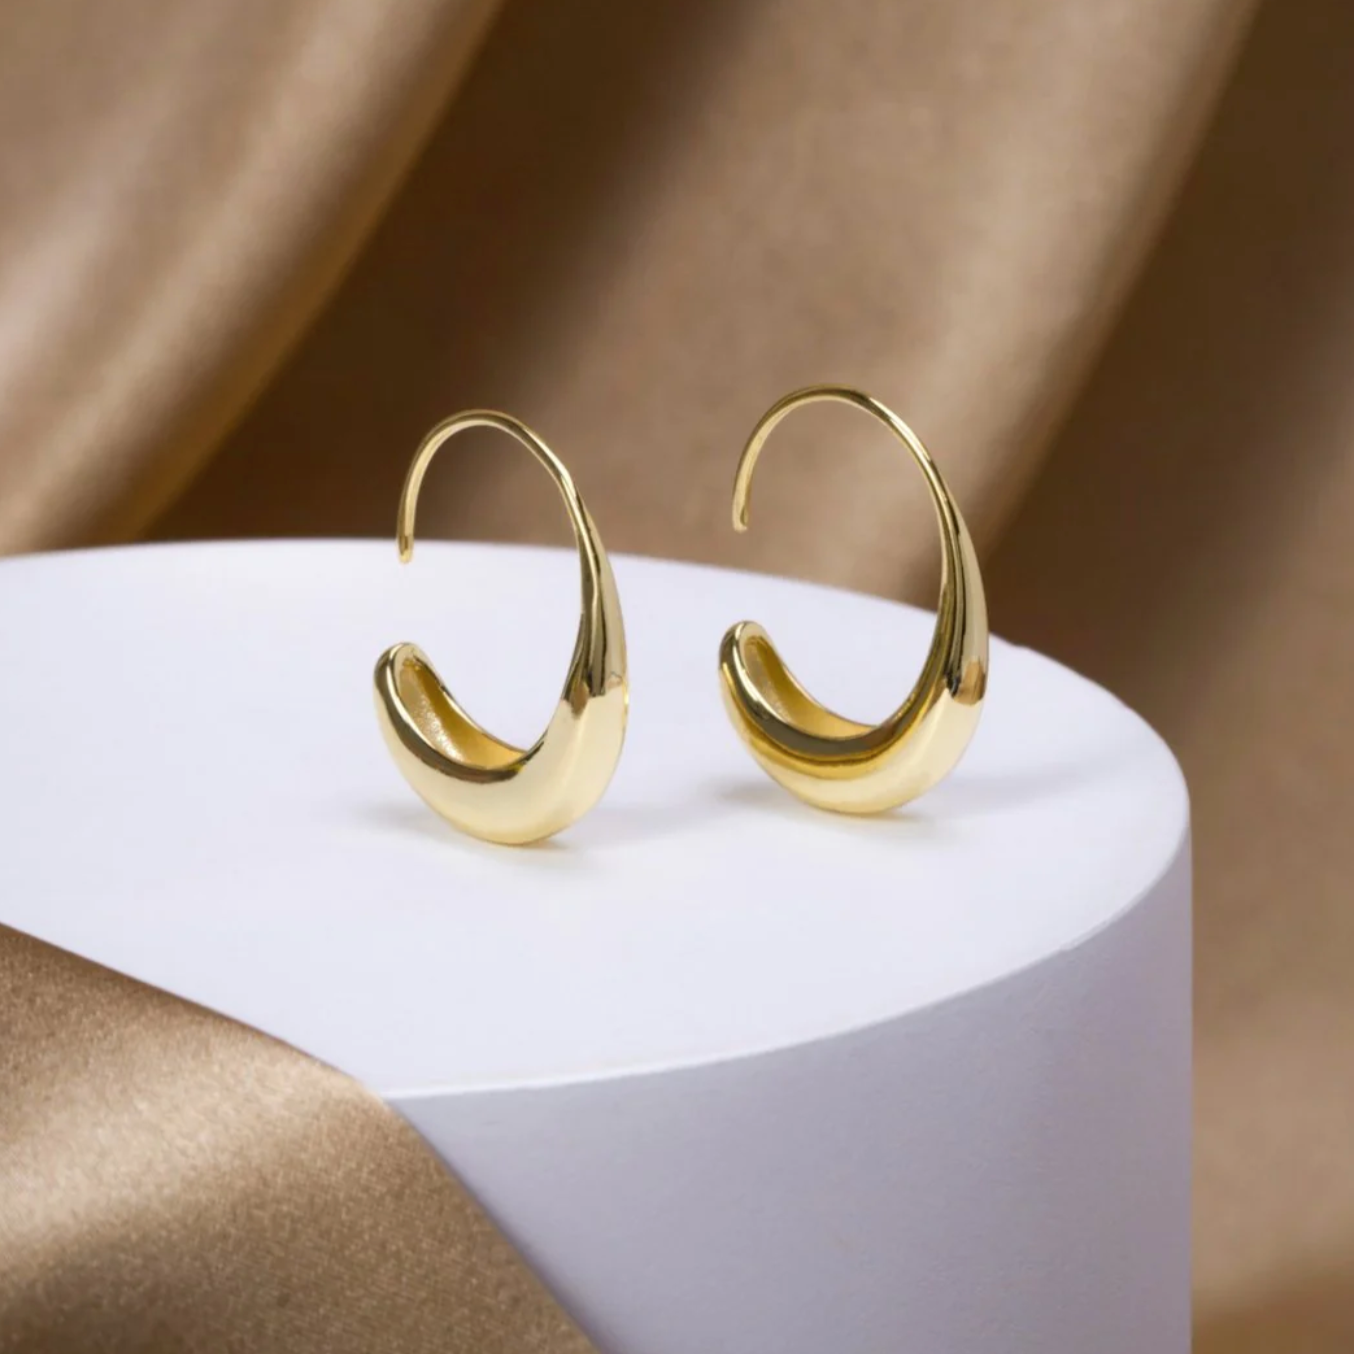 Large C form gold hoops for women